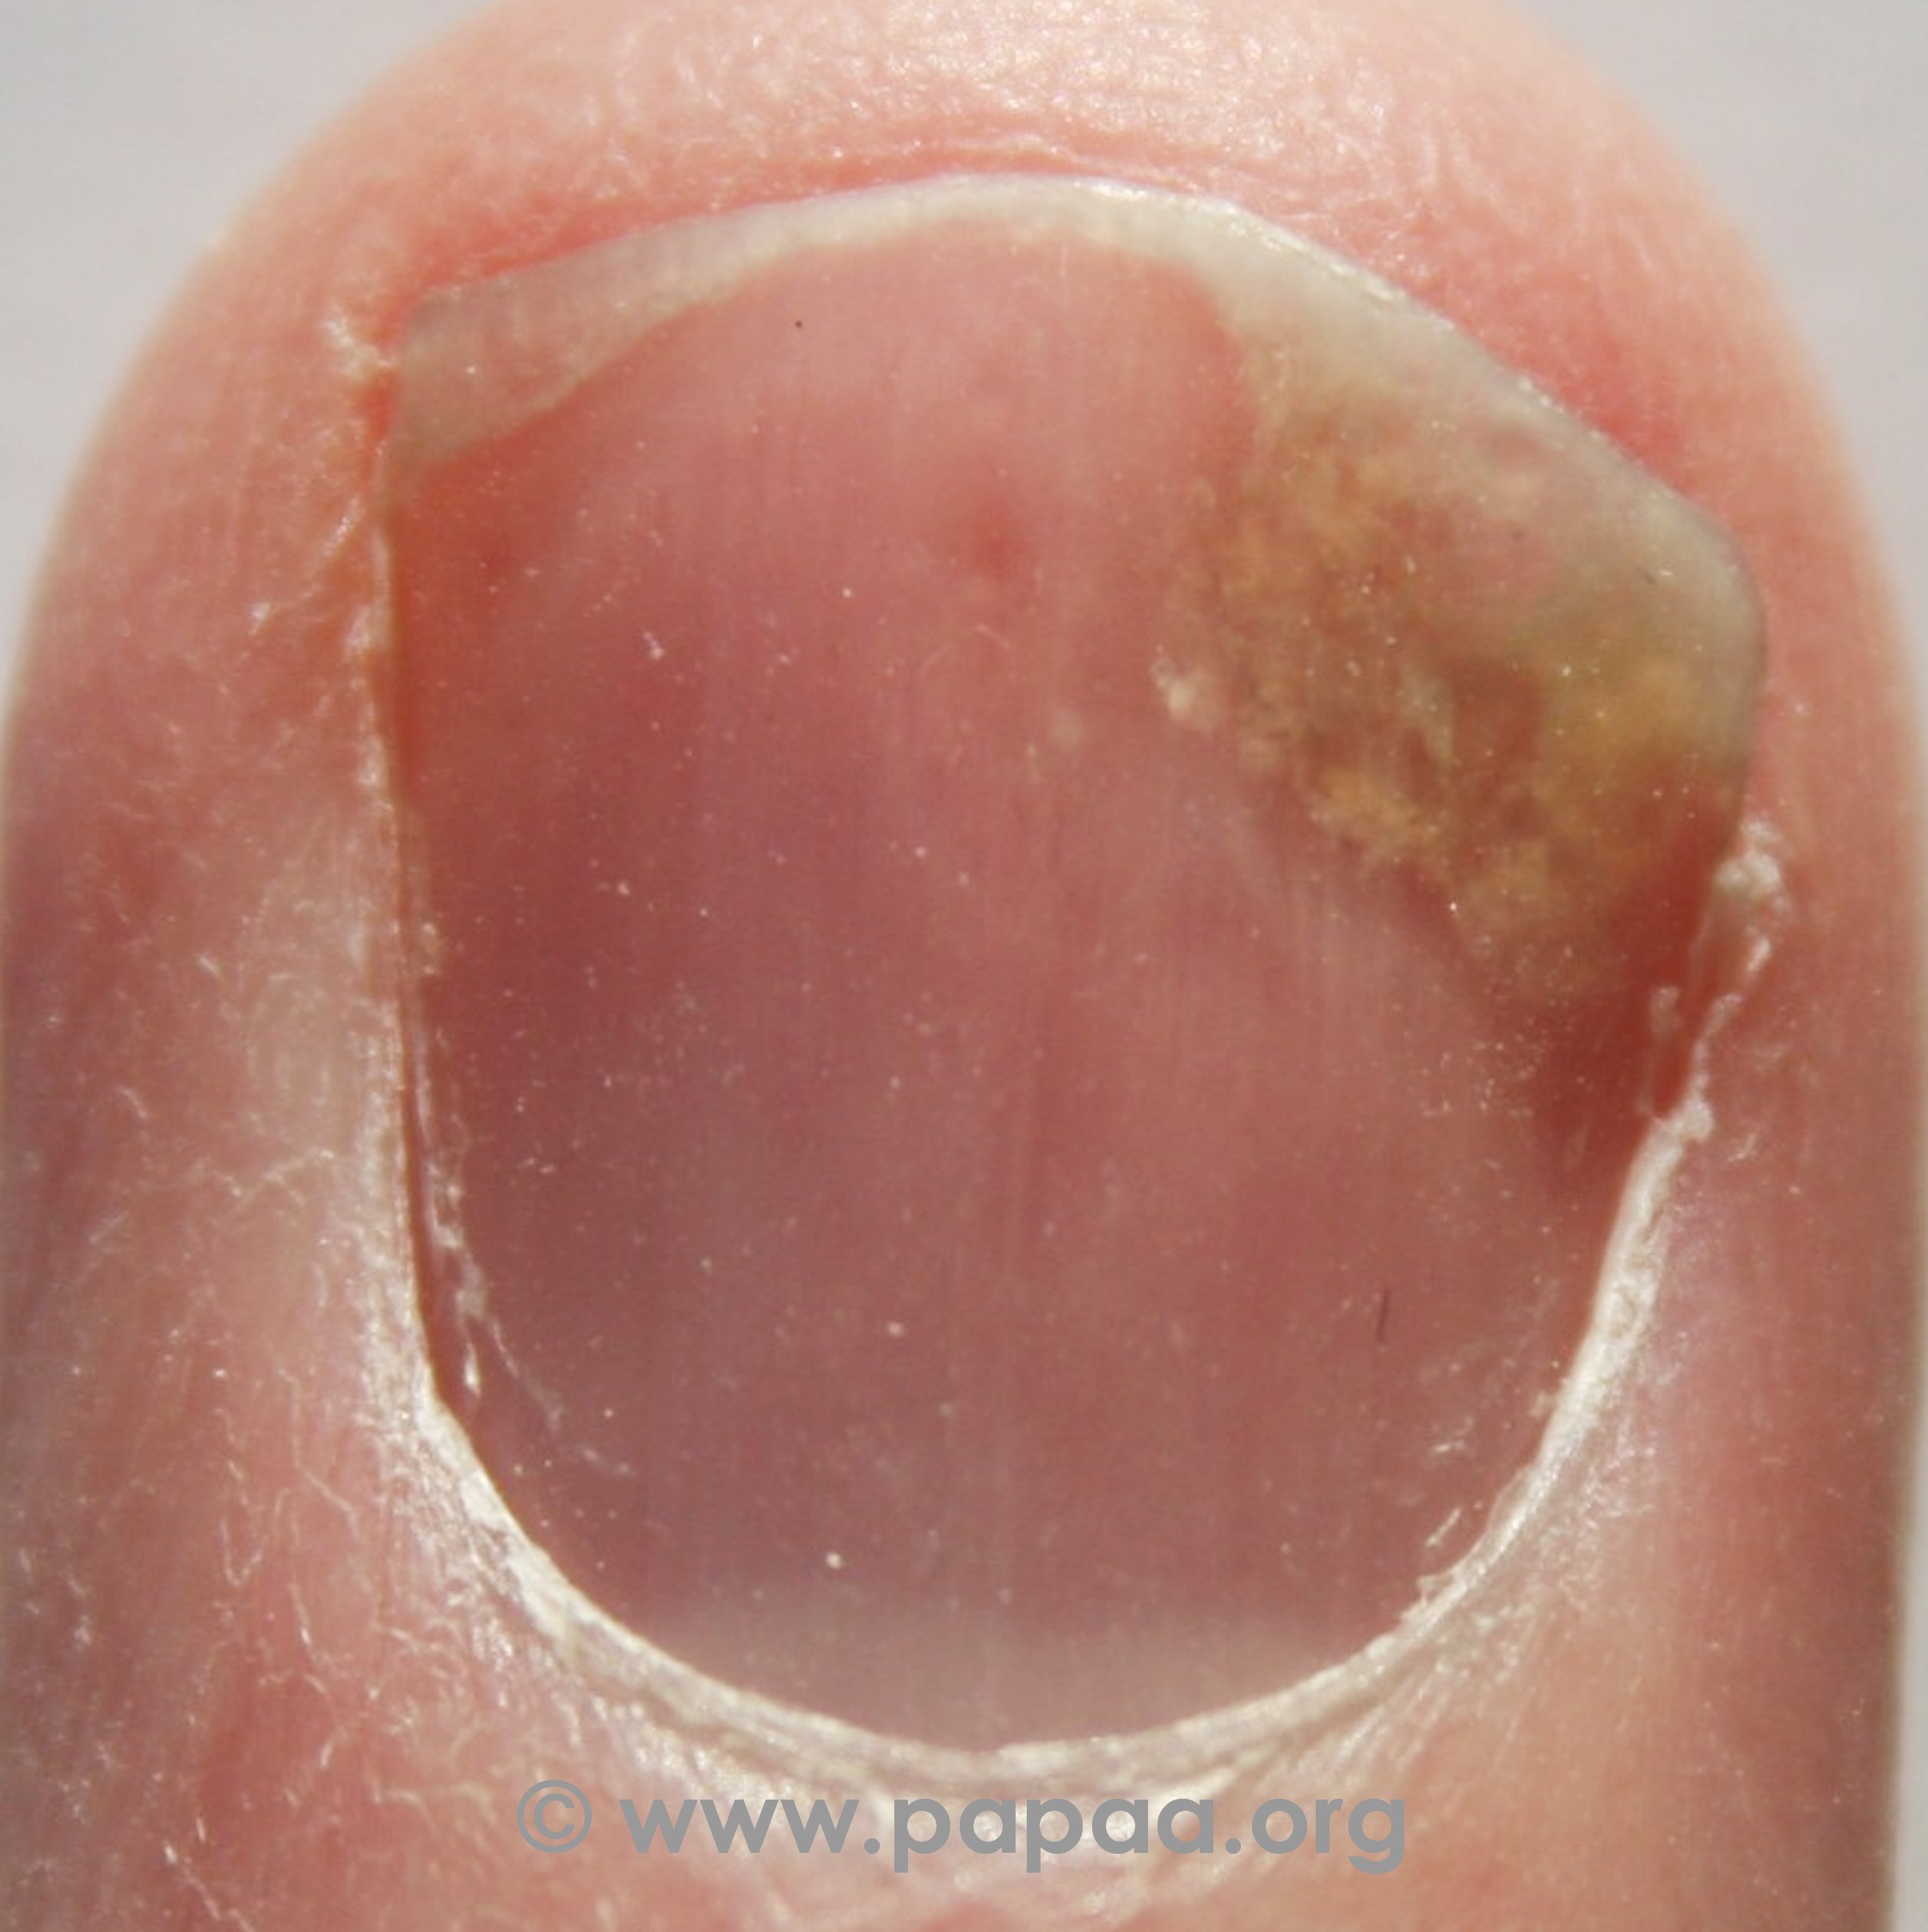 nail psoriasis after pregnancy)